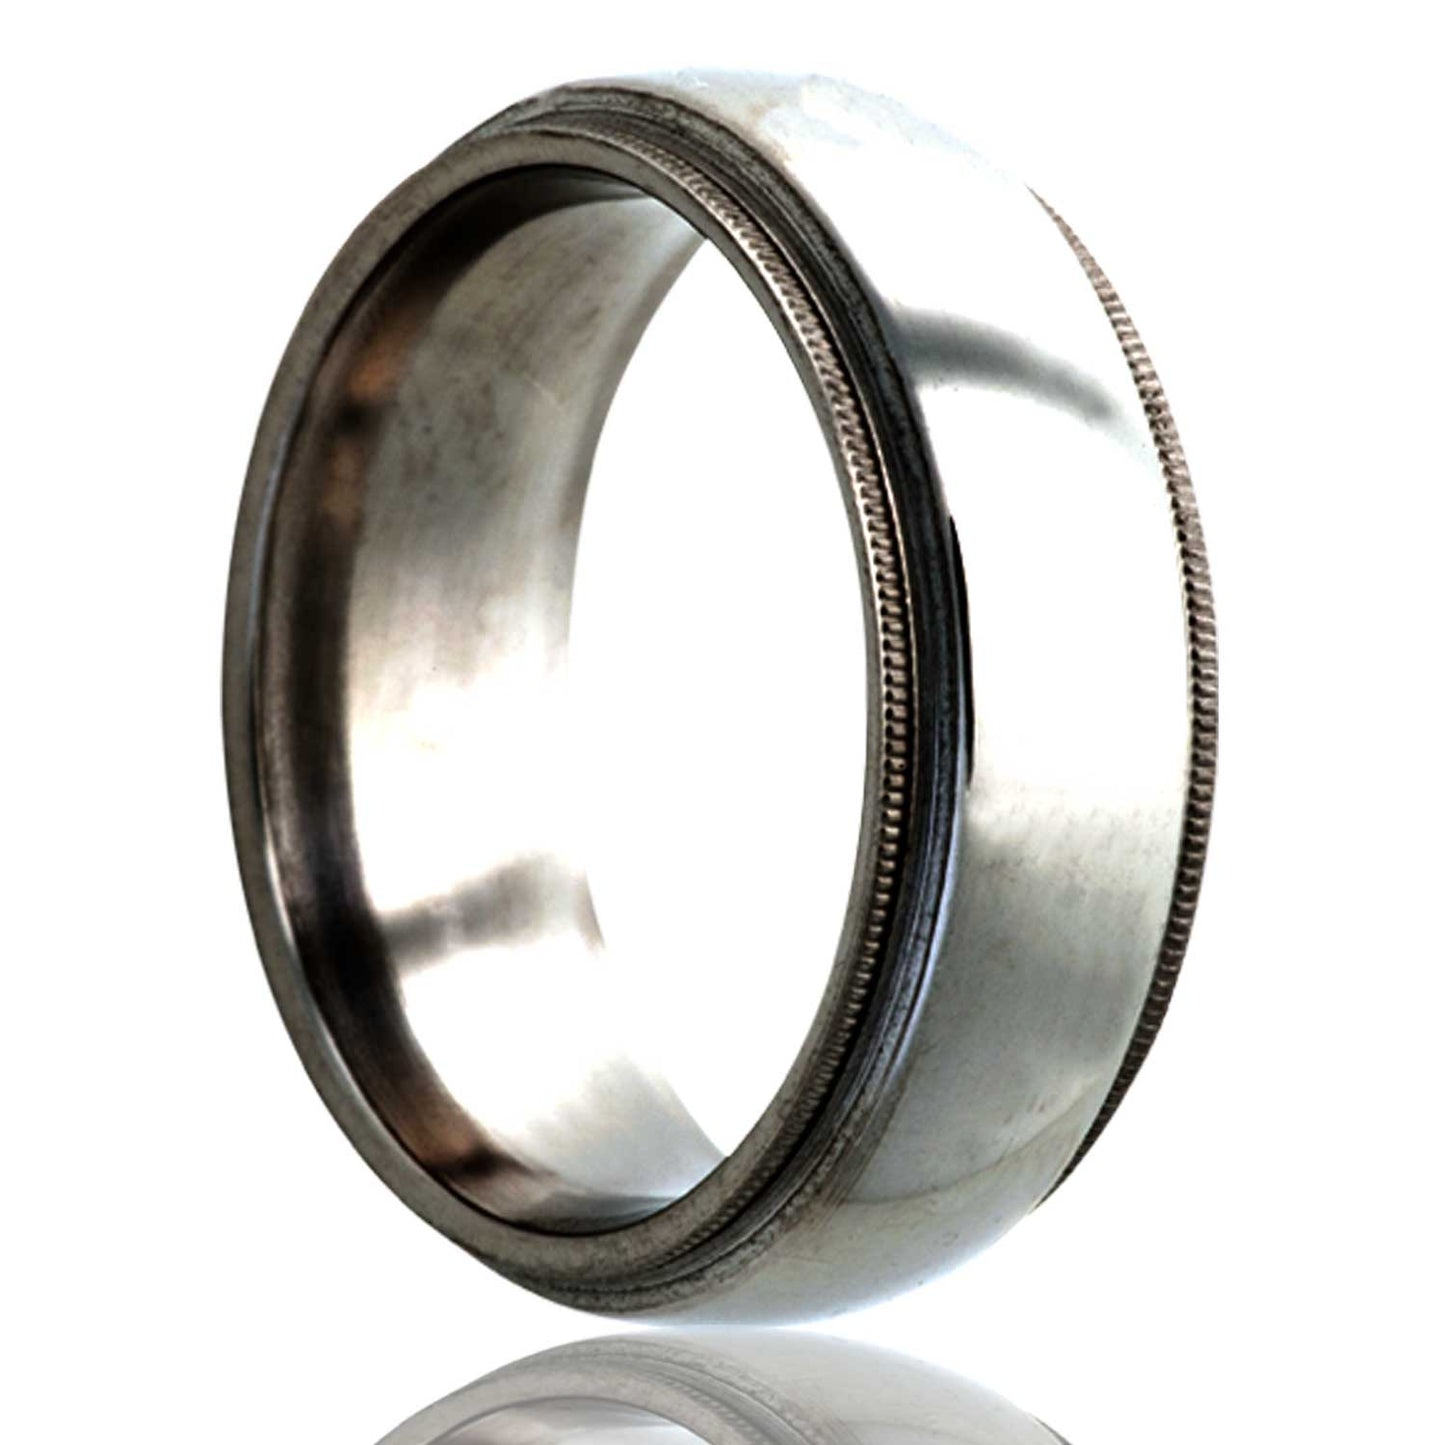 A domed titanium wedding band with milgrain stepped edges displayed on a neutral white background.